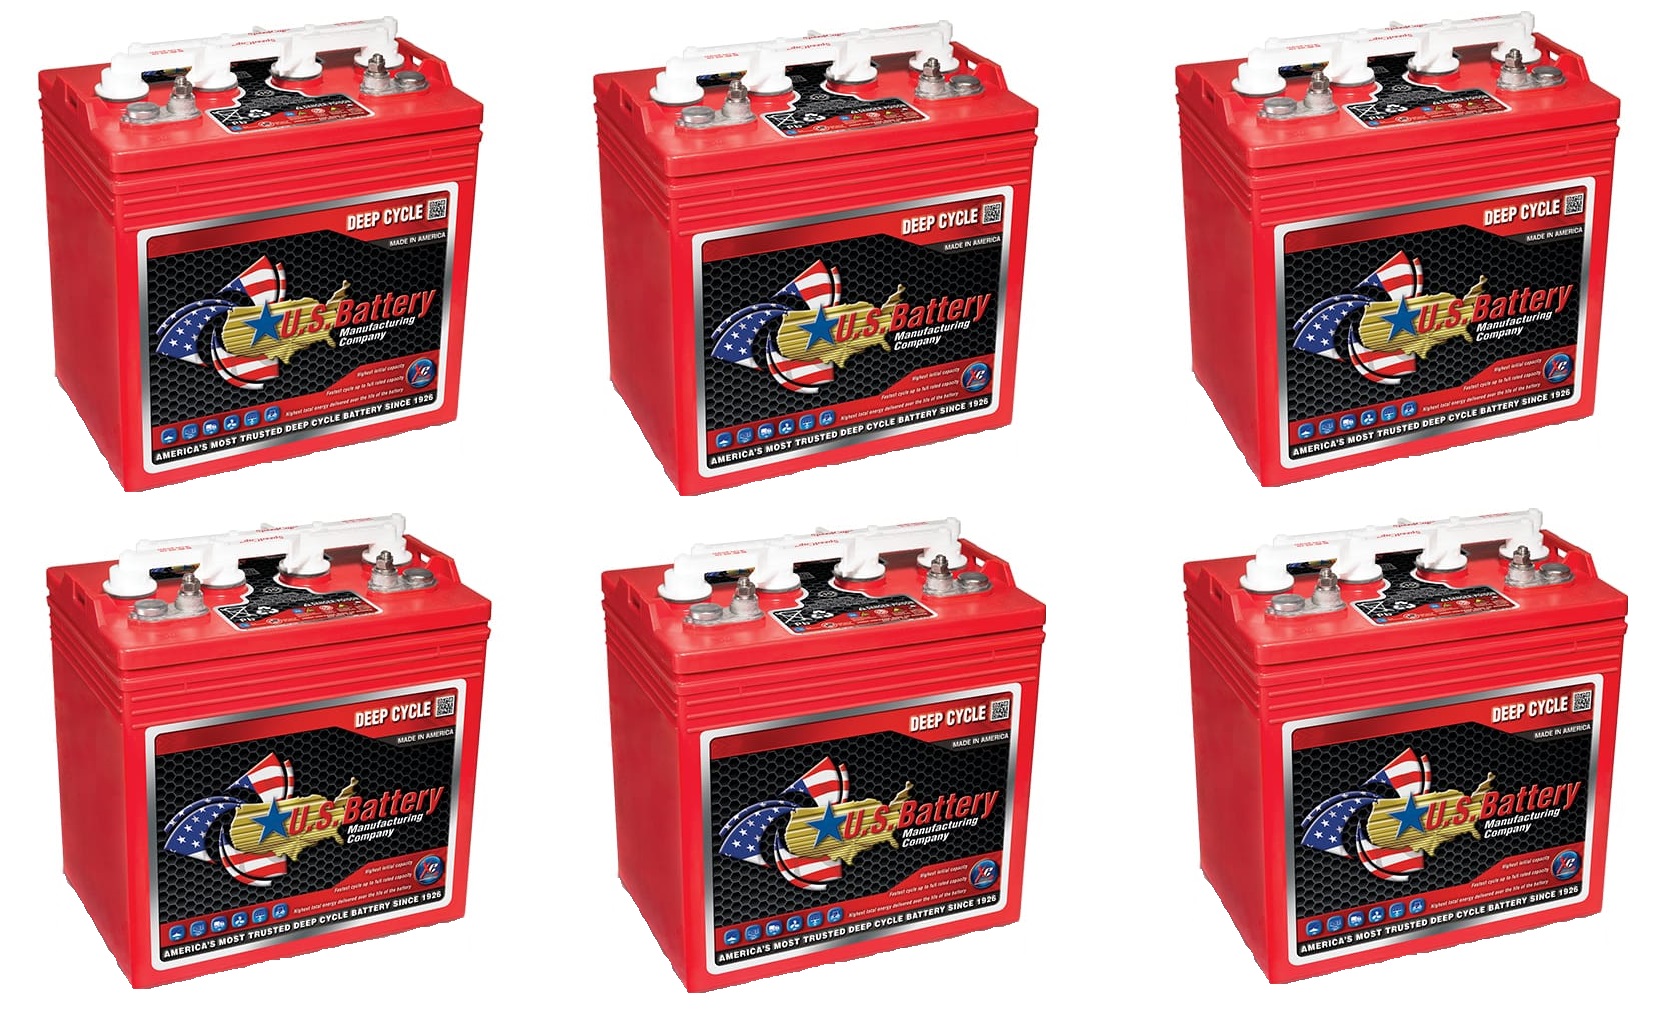 US Battery US8VGC T875 8 Volt, 170 AH Deep Cycle Battery - 6 Pack